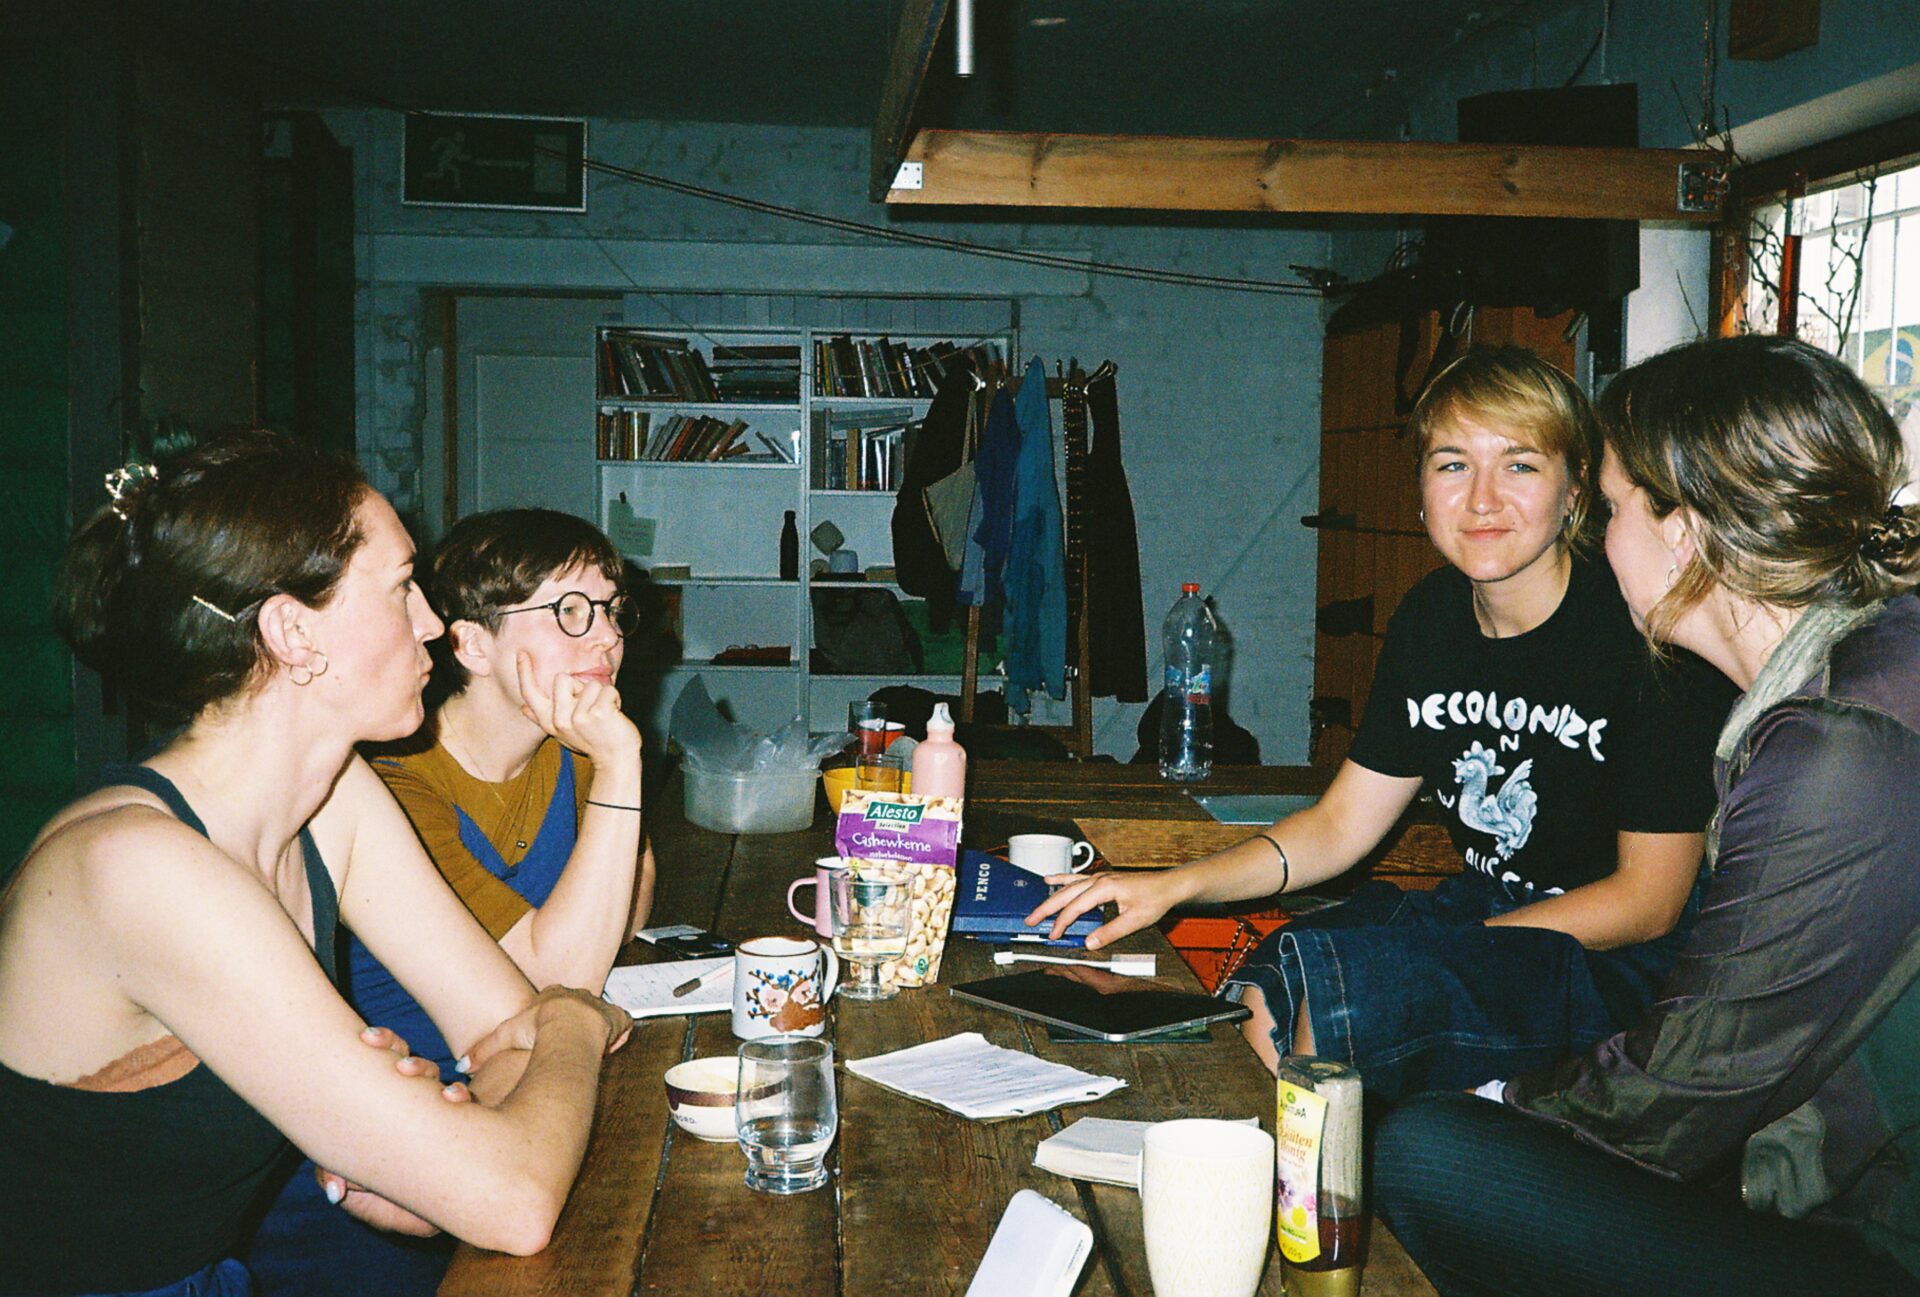 A color photo of four women, including Samantha Lippett and Ieva Gudaitylė, sitting at a table for an ICRN meeting. Three of them look at the fourth who is speaking.